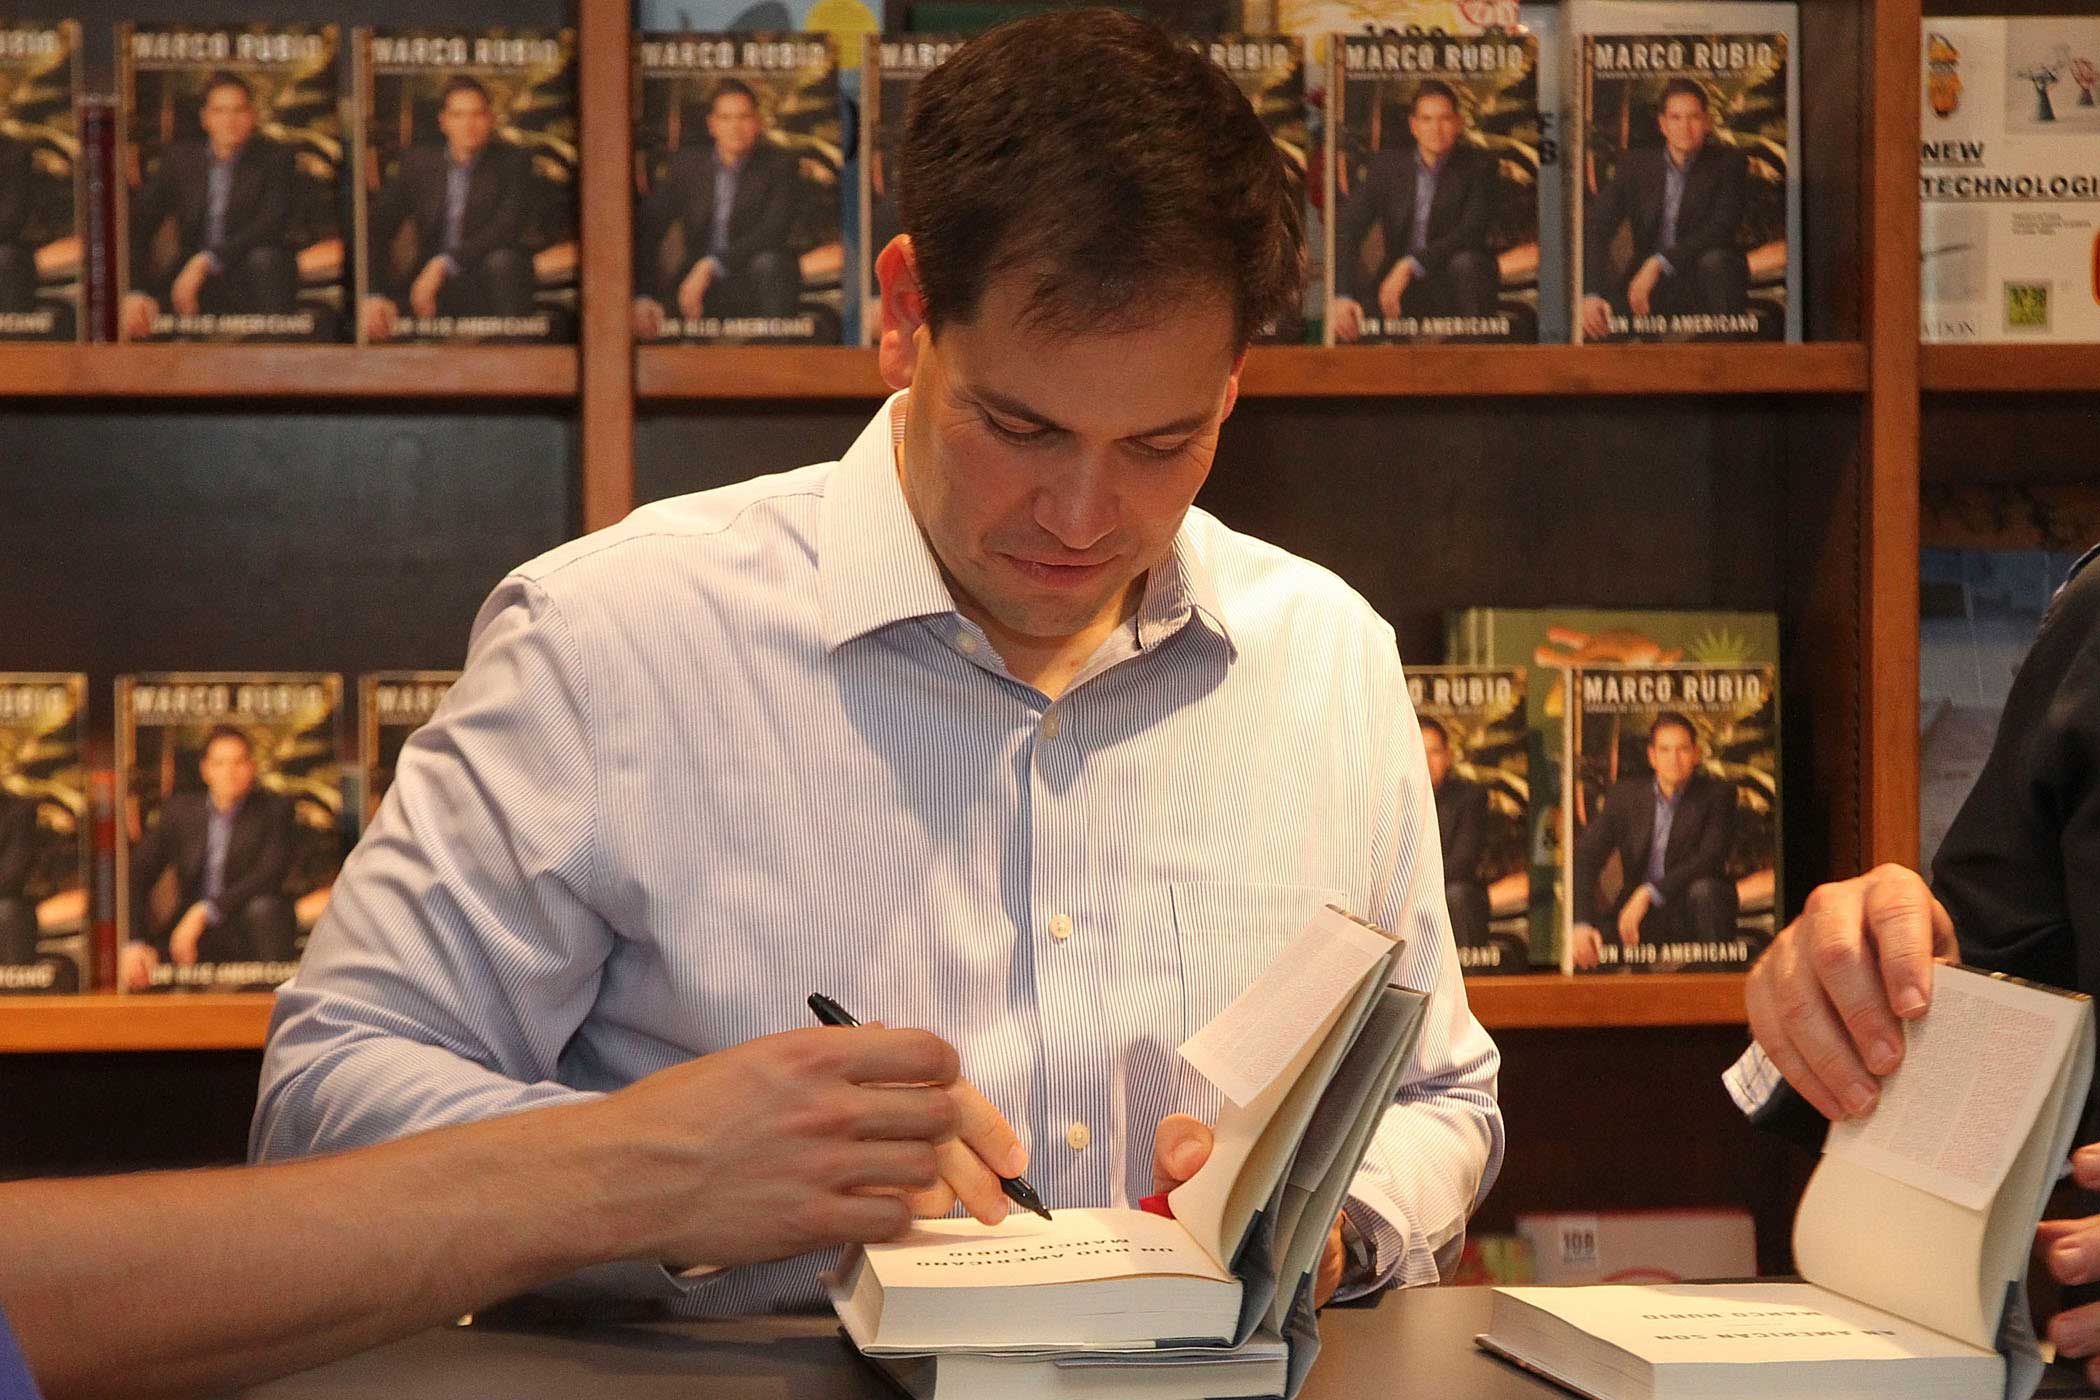 Senator Marco Rubio greets fans and signs copies of his book  An American Son  at Books and Books in Coral Gables, Fla., on June 30, 2012.